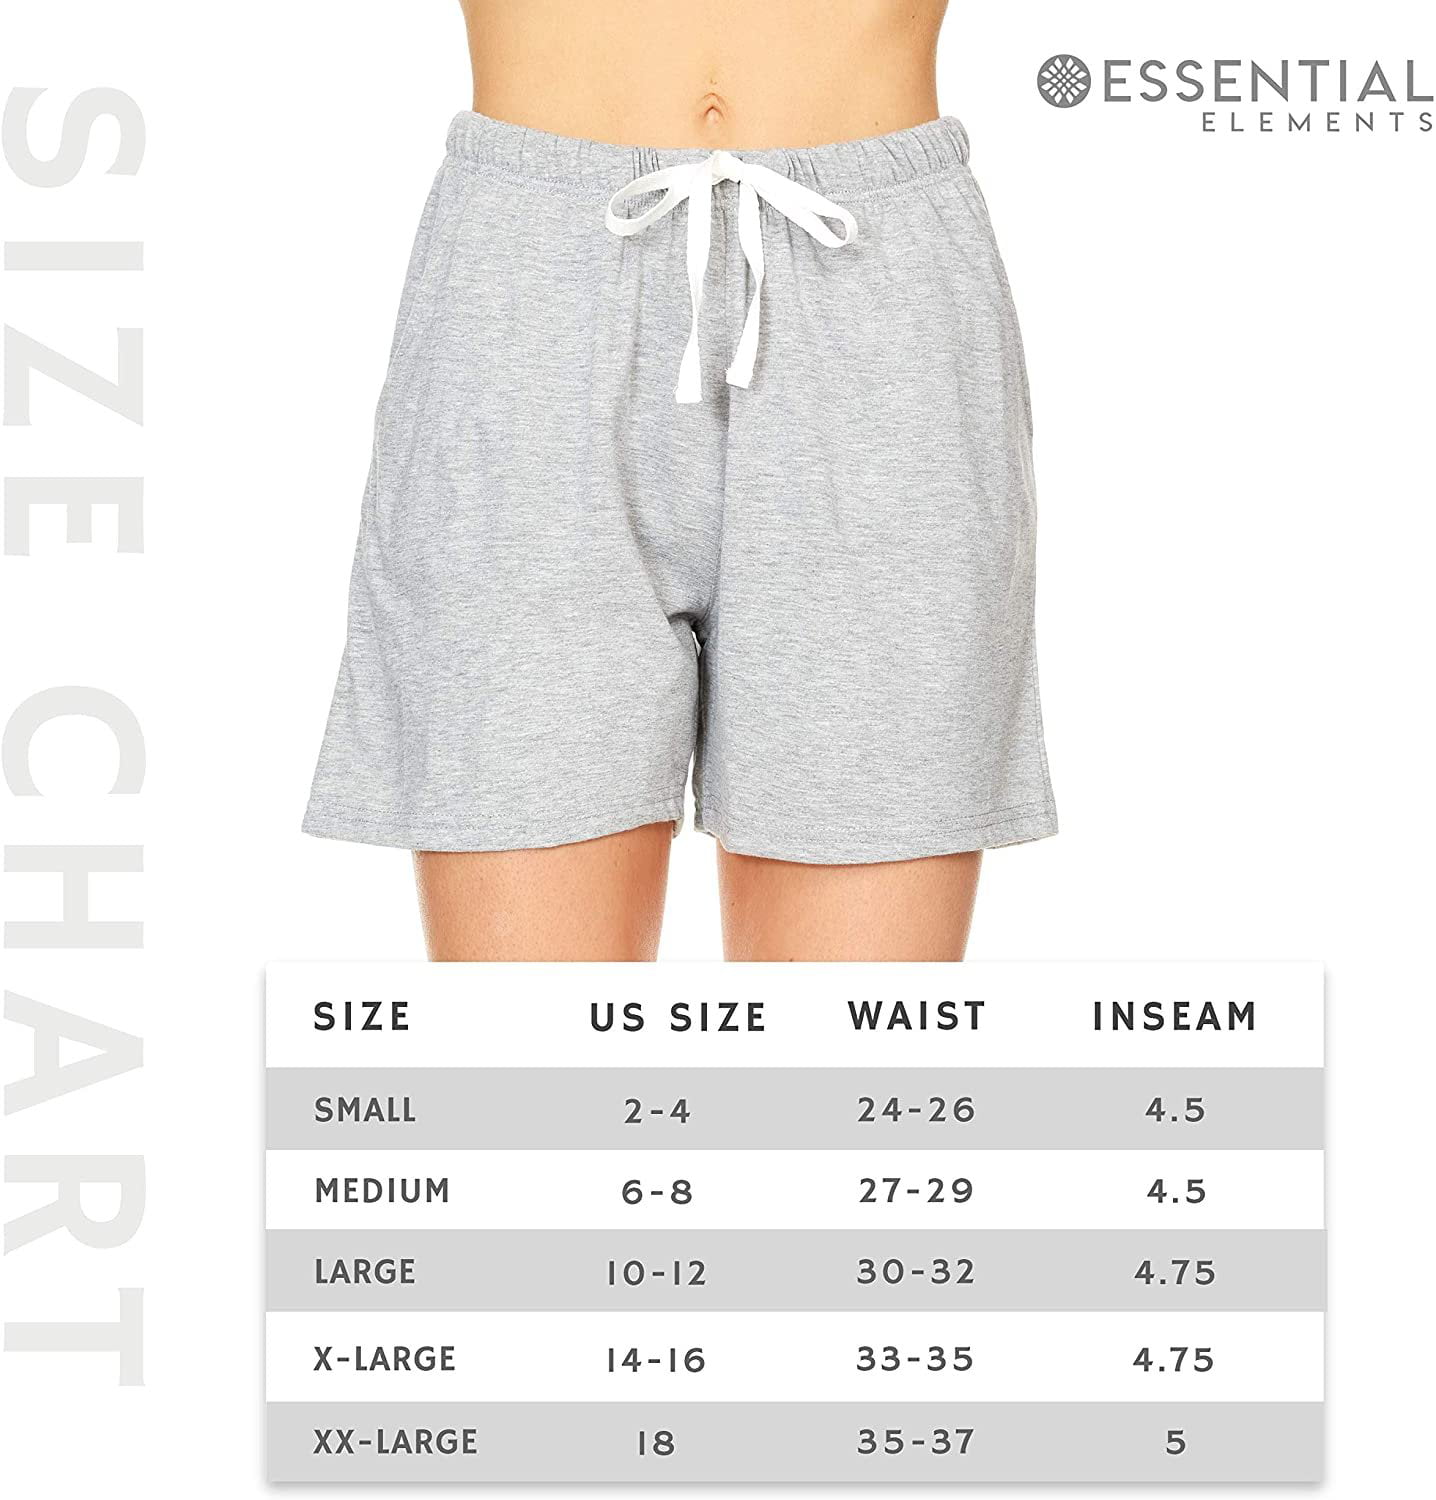 Essential Elements 3 Pack Women's 100% Cotton Casual Active Gym Lounge Sleep Bottom Pajama Shorts 